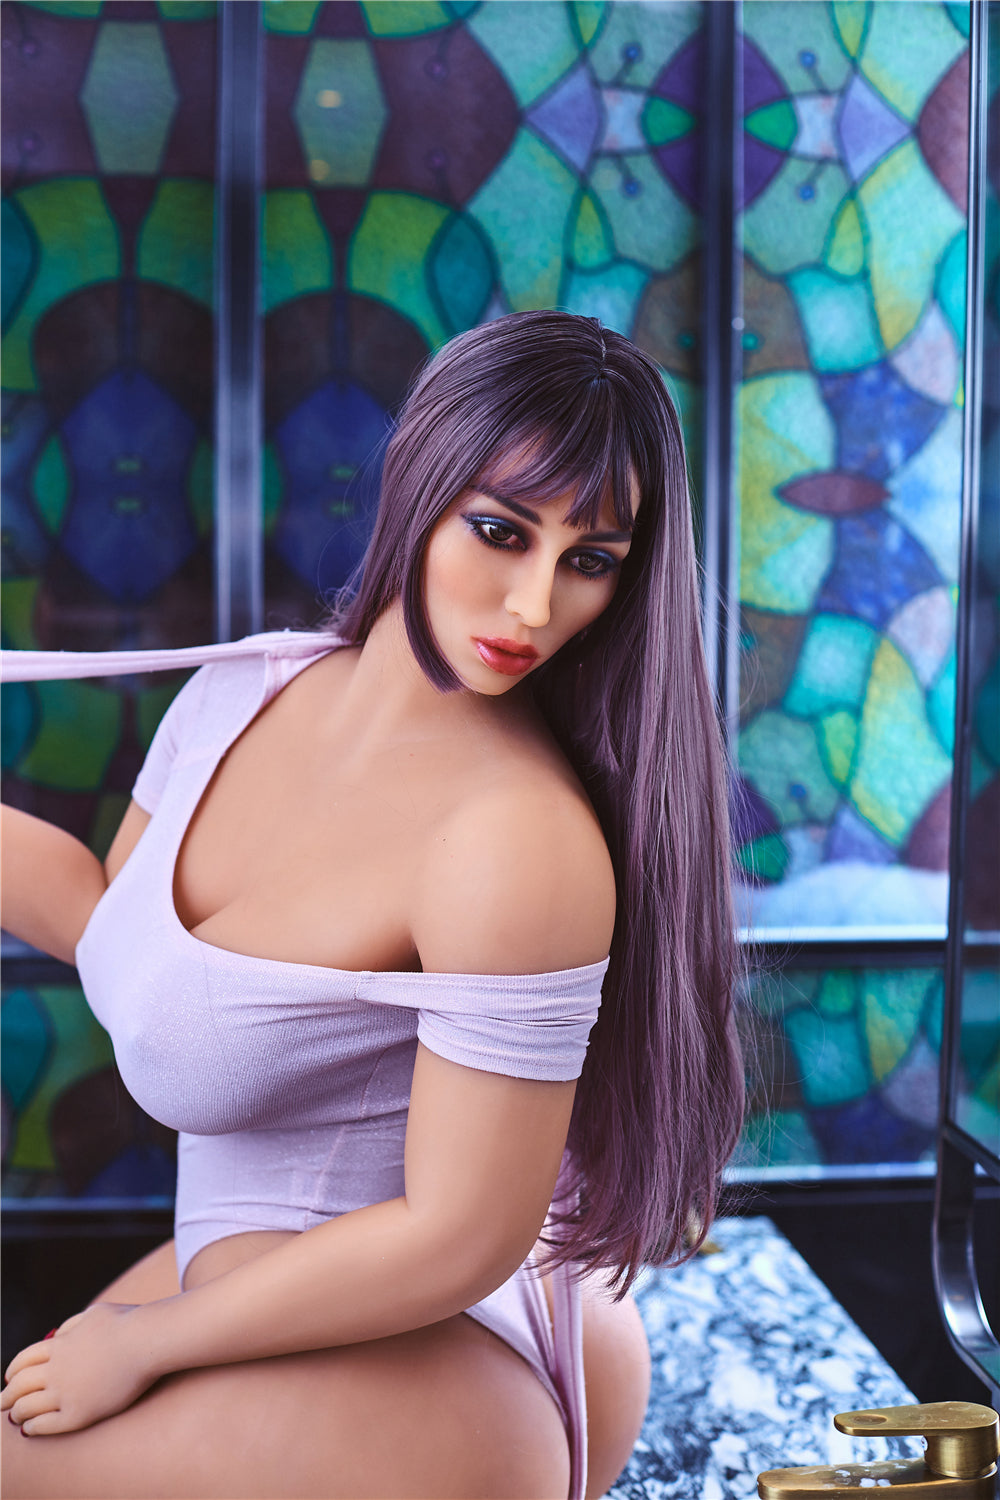 Irontech Doll 156 cm E TPE - Marley | Buy Sex Dolls at DOLLS ACTUALLY